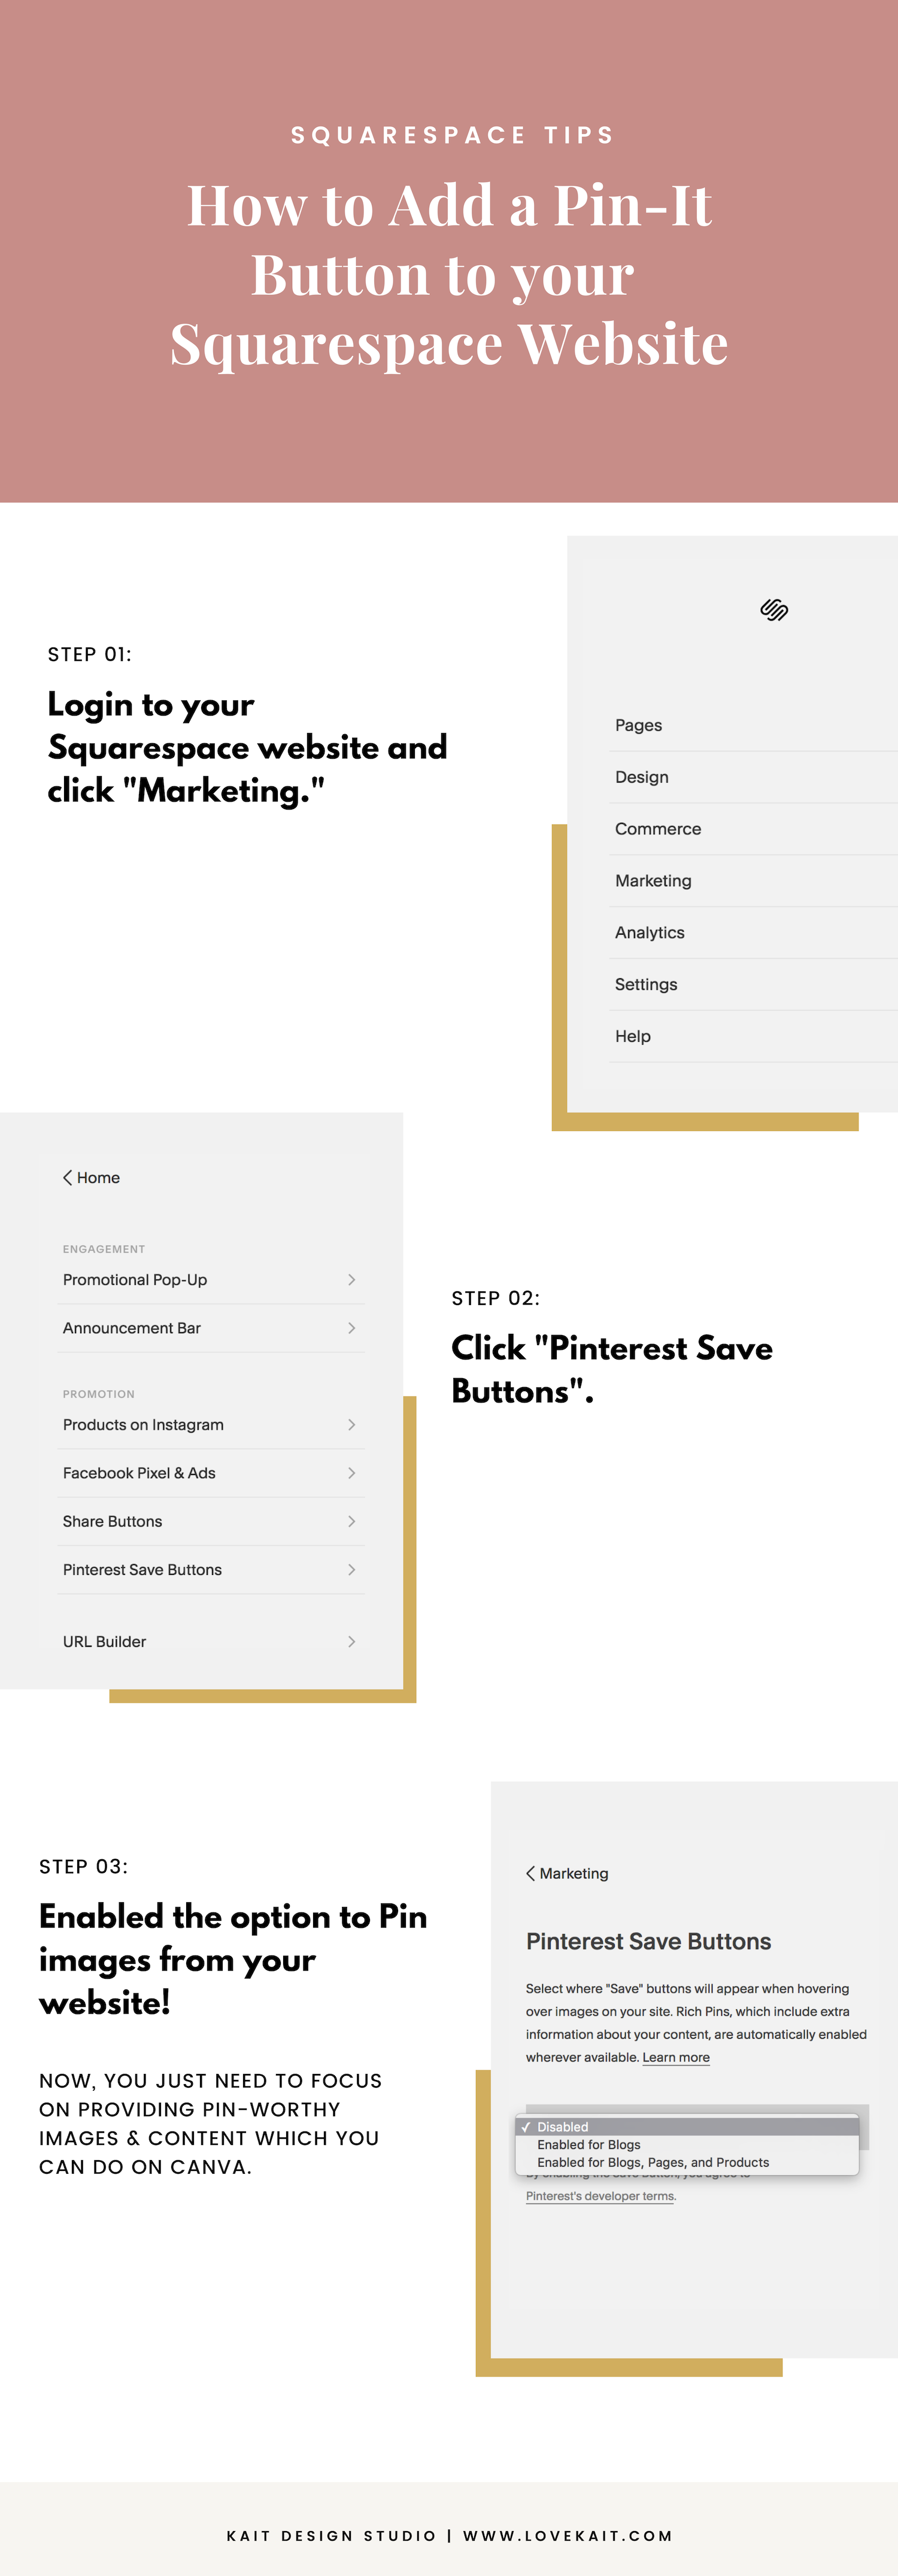 add a pinterest pin it button in squarespace